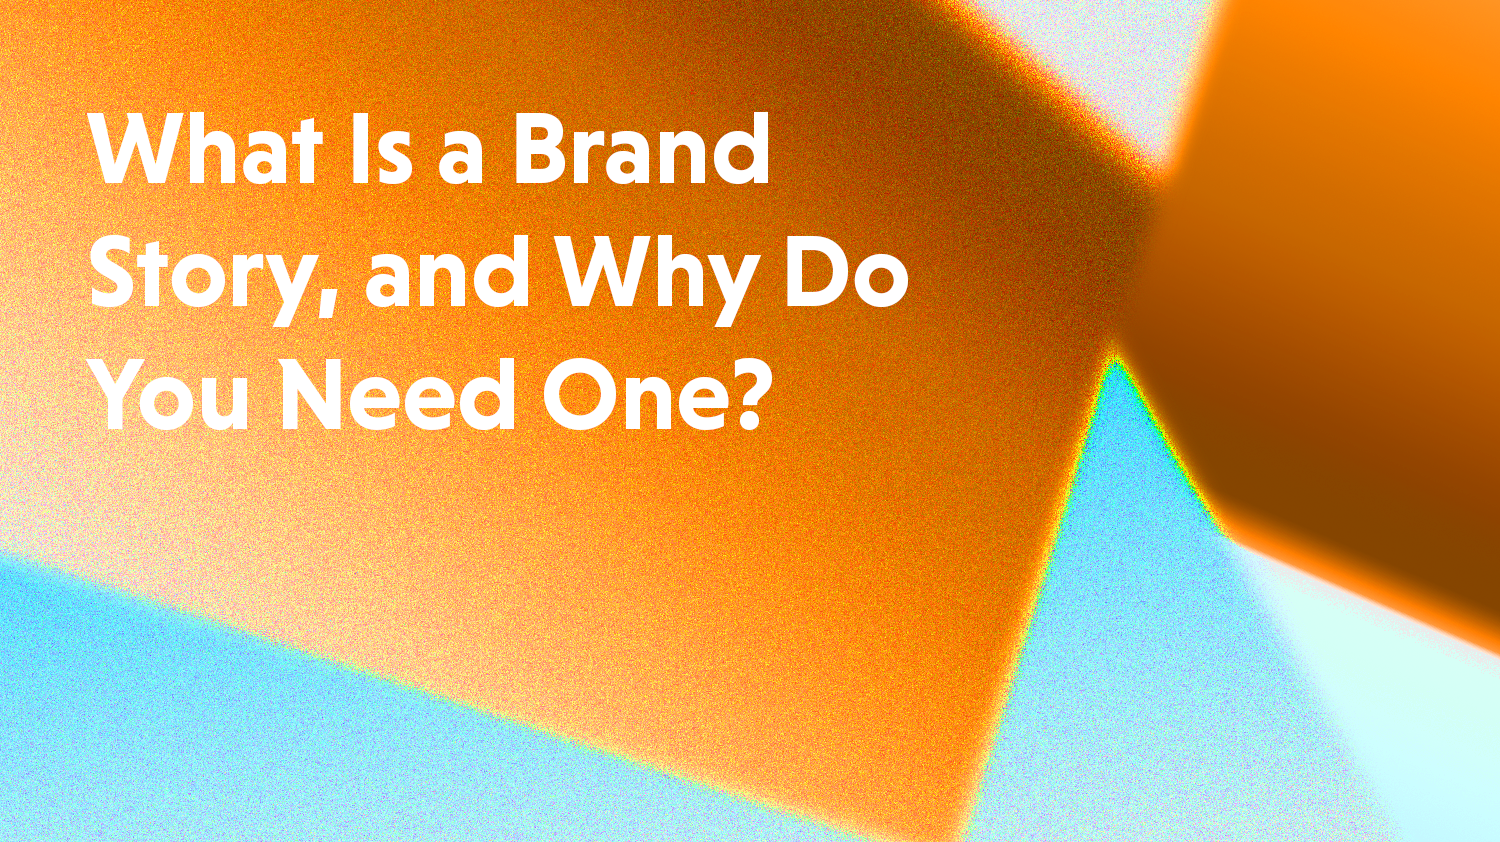 What is a brand story, and why do you need one?